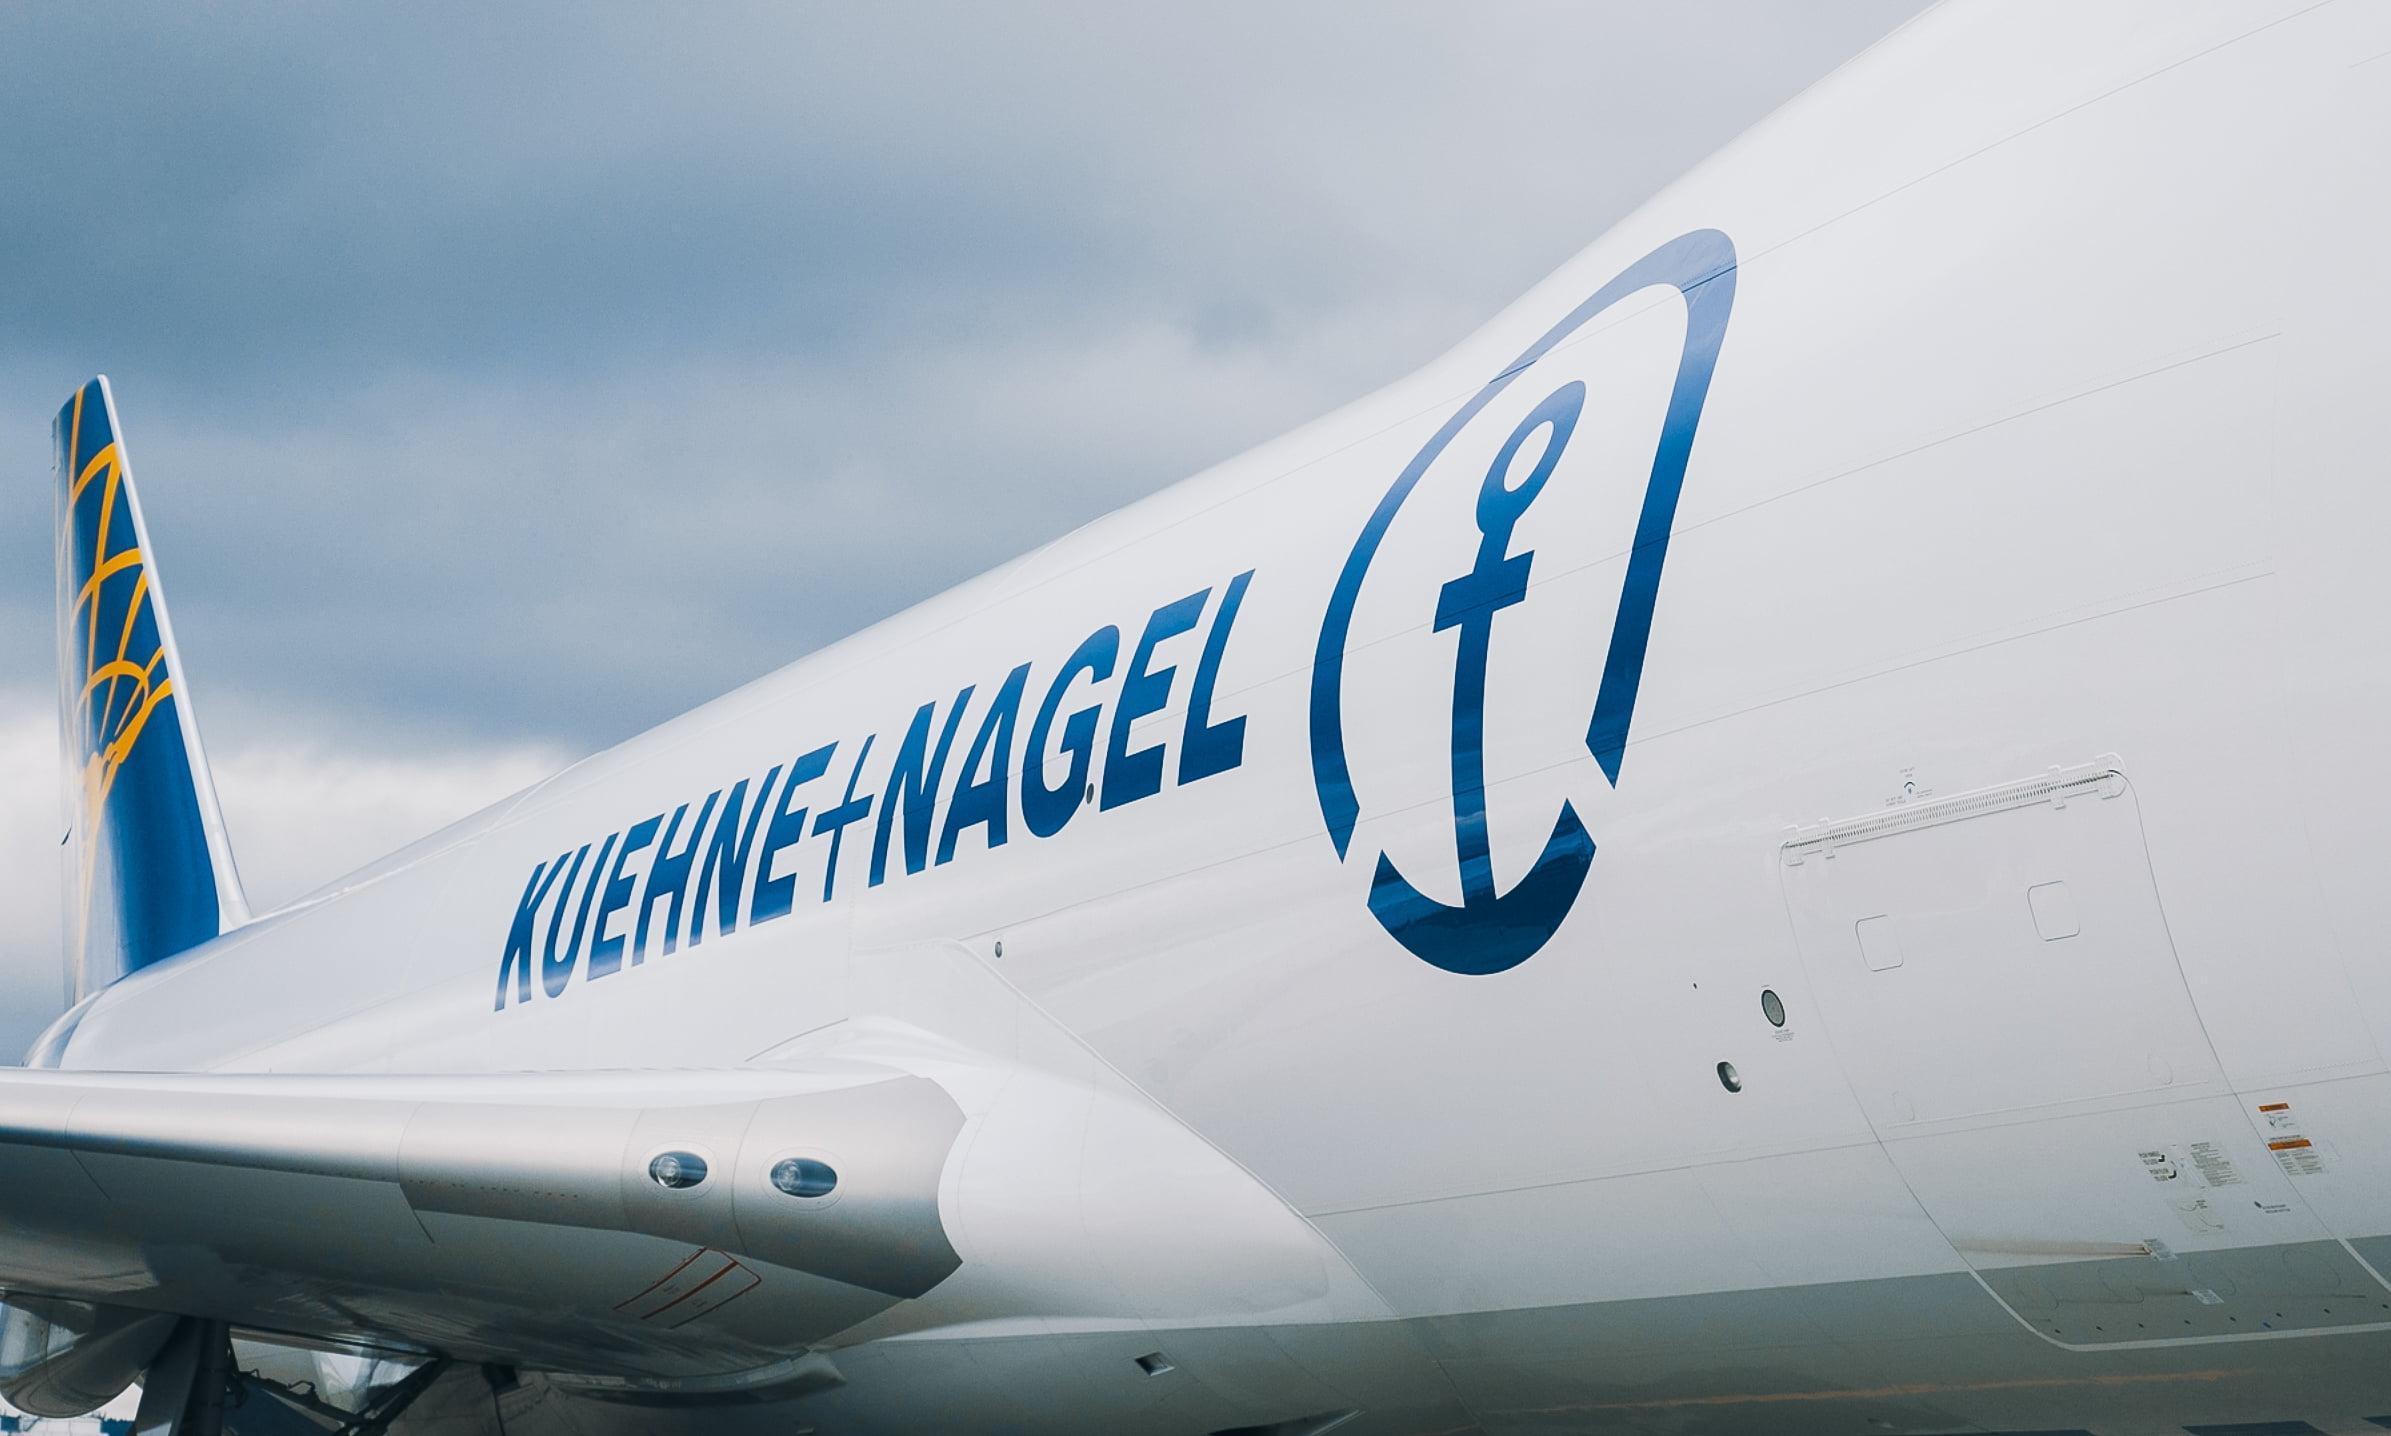 Kuehne+Nagel acquires South African freight forwarder Morgan Cargo